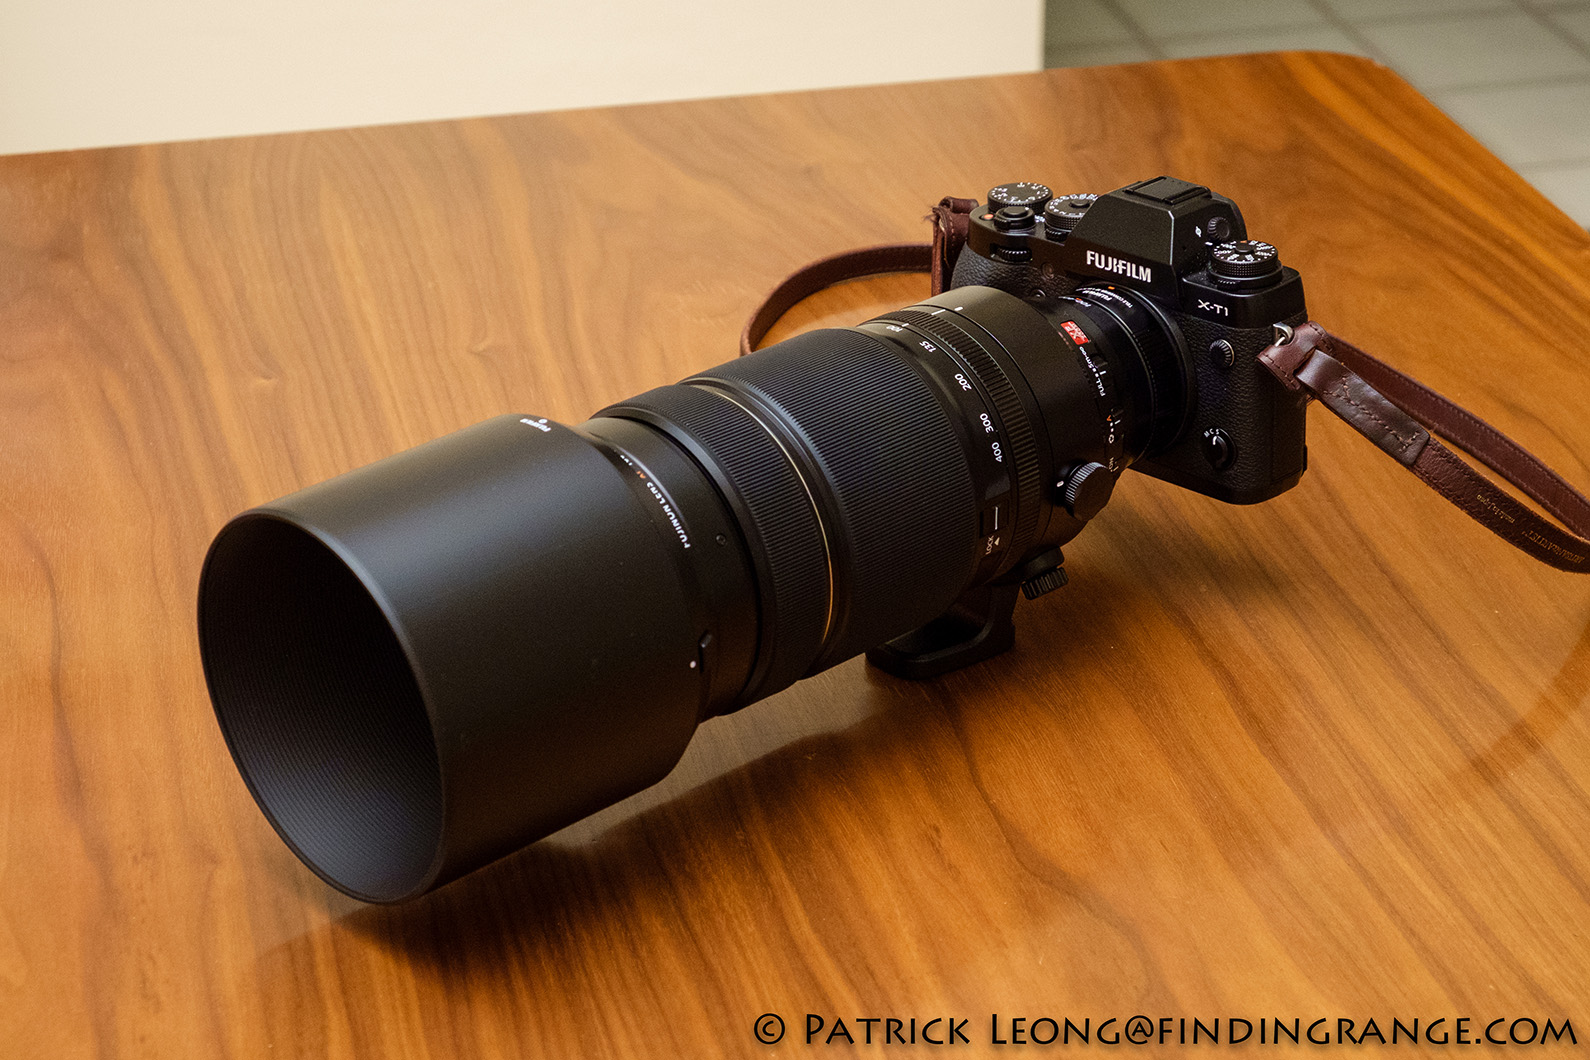 Fuji XF 100-400mm f/4.5-5.6 R LM OIS WR lens Quick Look